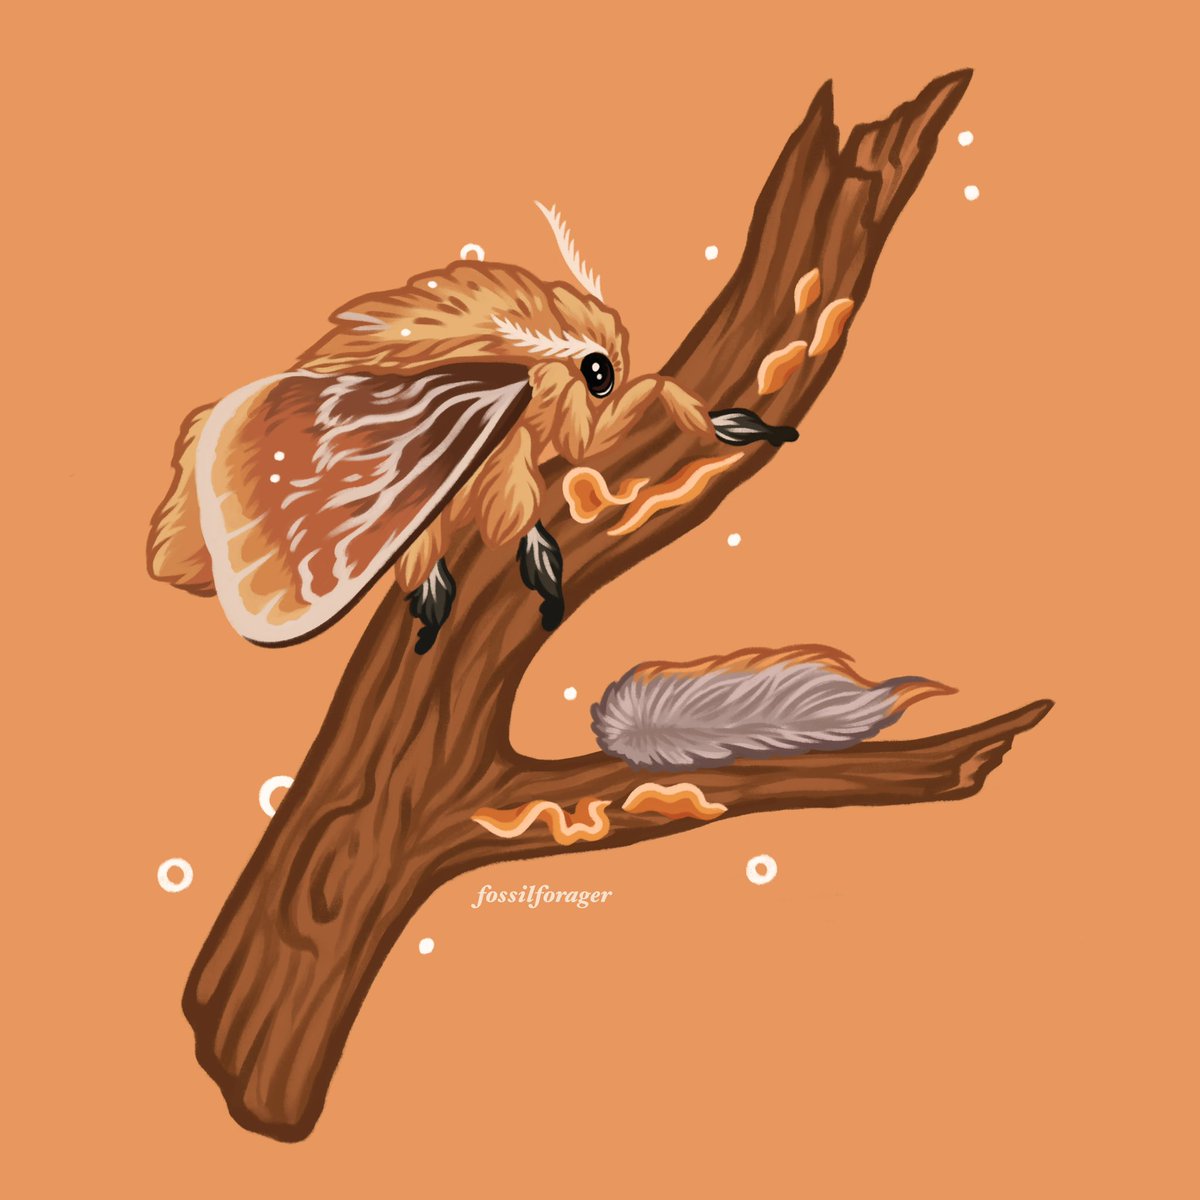 「Southern flannel moth  」|Nicole 🌱のイラスト